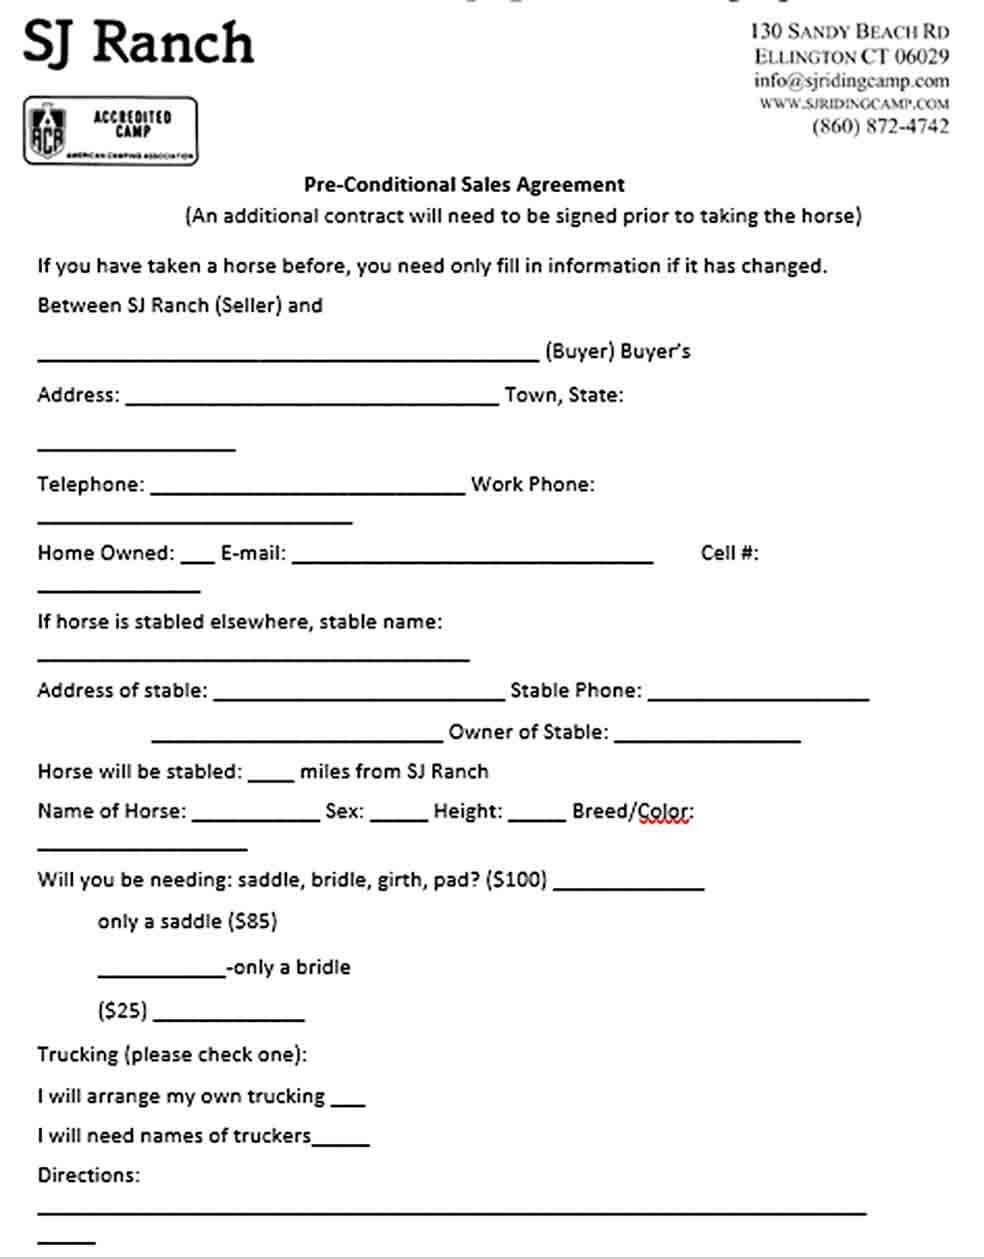 Sample Ranch Pre Conditional Sales Agreement Template